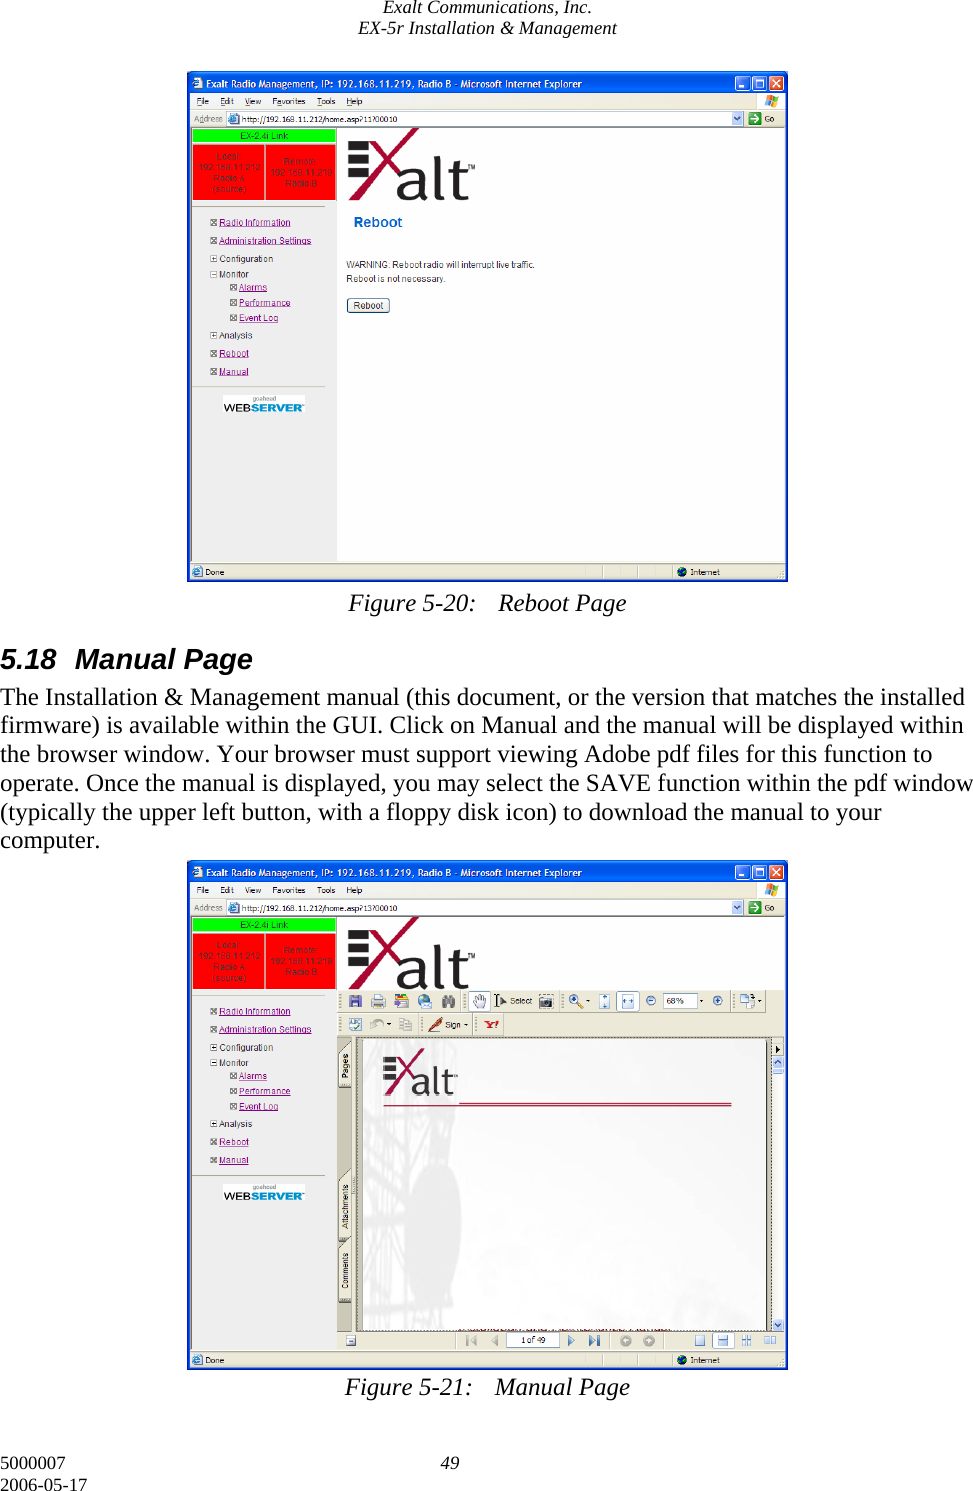 Exalt Communications, Inc. EX-5r Installation &amp; Management 5000007  49 2006-05-17                   Figure 5-20:  Reboot Page 5.18 Manual Page The Installation &amp; Management manual (this document, or the version that matches the installed firmware) is available within the GUI. Click on Manual and the manual will be displayed within the browser window. Your browser must support viewing Adobe pdf files for this function to operate. Once the manual is displayed, you may select the SAVE function within the pdf window (typically the upper left button, with a floppy disk icon) to download the manual to your computer.                   Figure 5-21:  Manual Page 